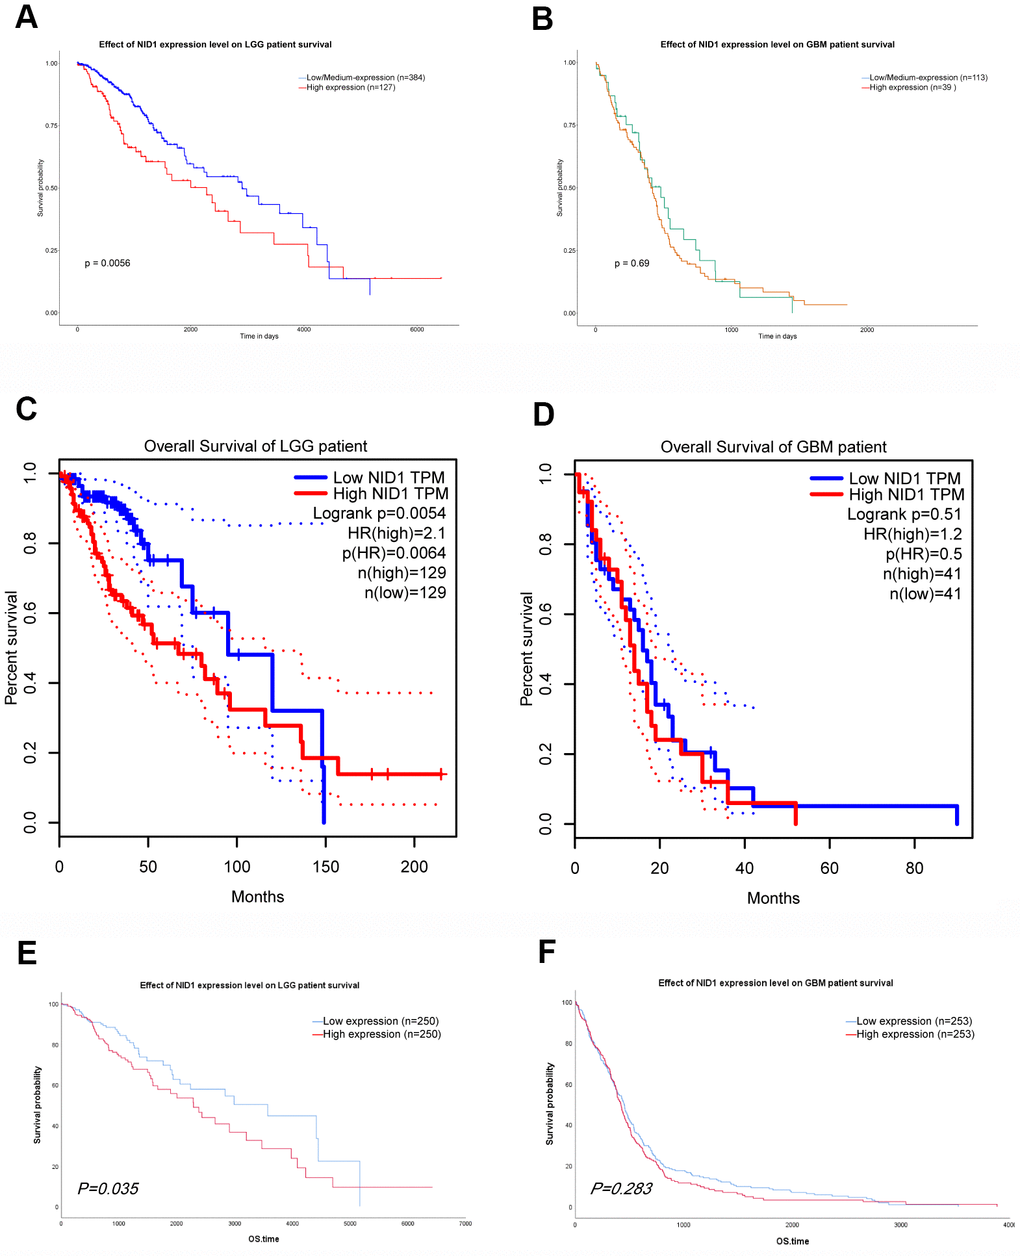 NID1 expression correlates with overall survival of LGG patients. (A, B) Kaplan-Meier survival curves show overall survival of low- and high-NID1-expressing LGG and GBM patients from the UALCAN database. (C, D) Kaplan-Meier survival curves show overall survival of low- and high-NID1-expressing LGG and GBM patients from the GEPIA database. HR refers to hazard ratio. (E, F) Kaplan-Meier survival curves show overall survival of low- and high-NID1-expressing LGG and GBM patients from the TCGA database. Note: Blue represents low NID1 expression; red represents high NID1 expression.